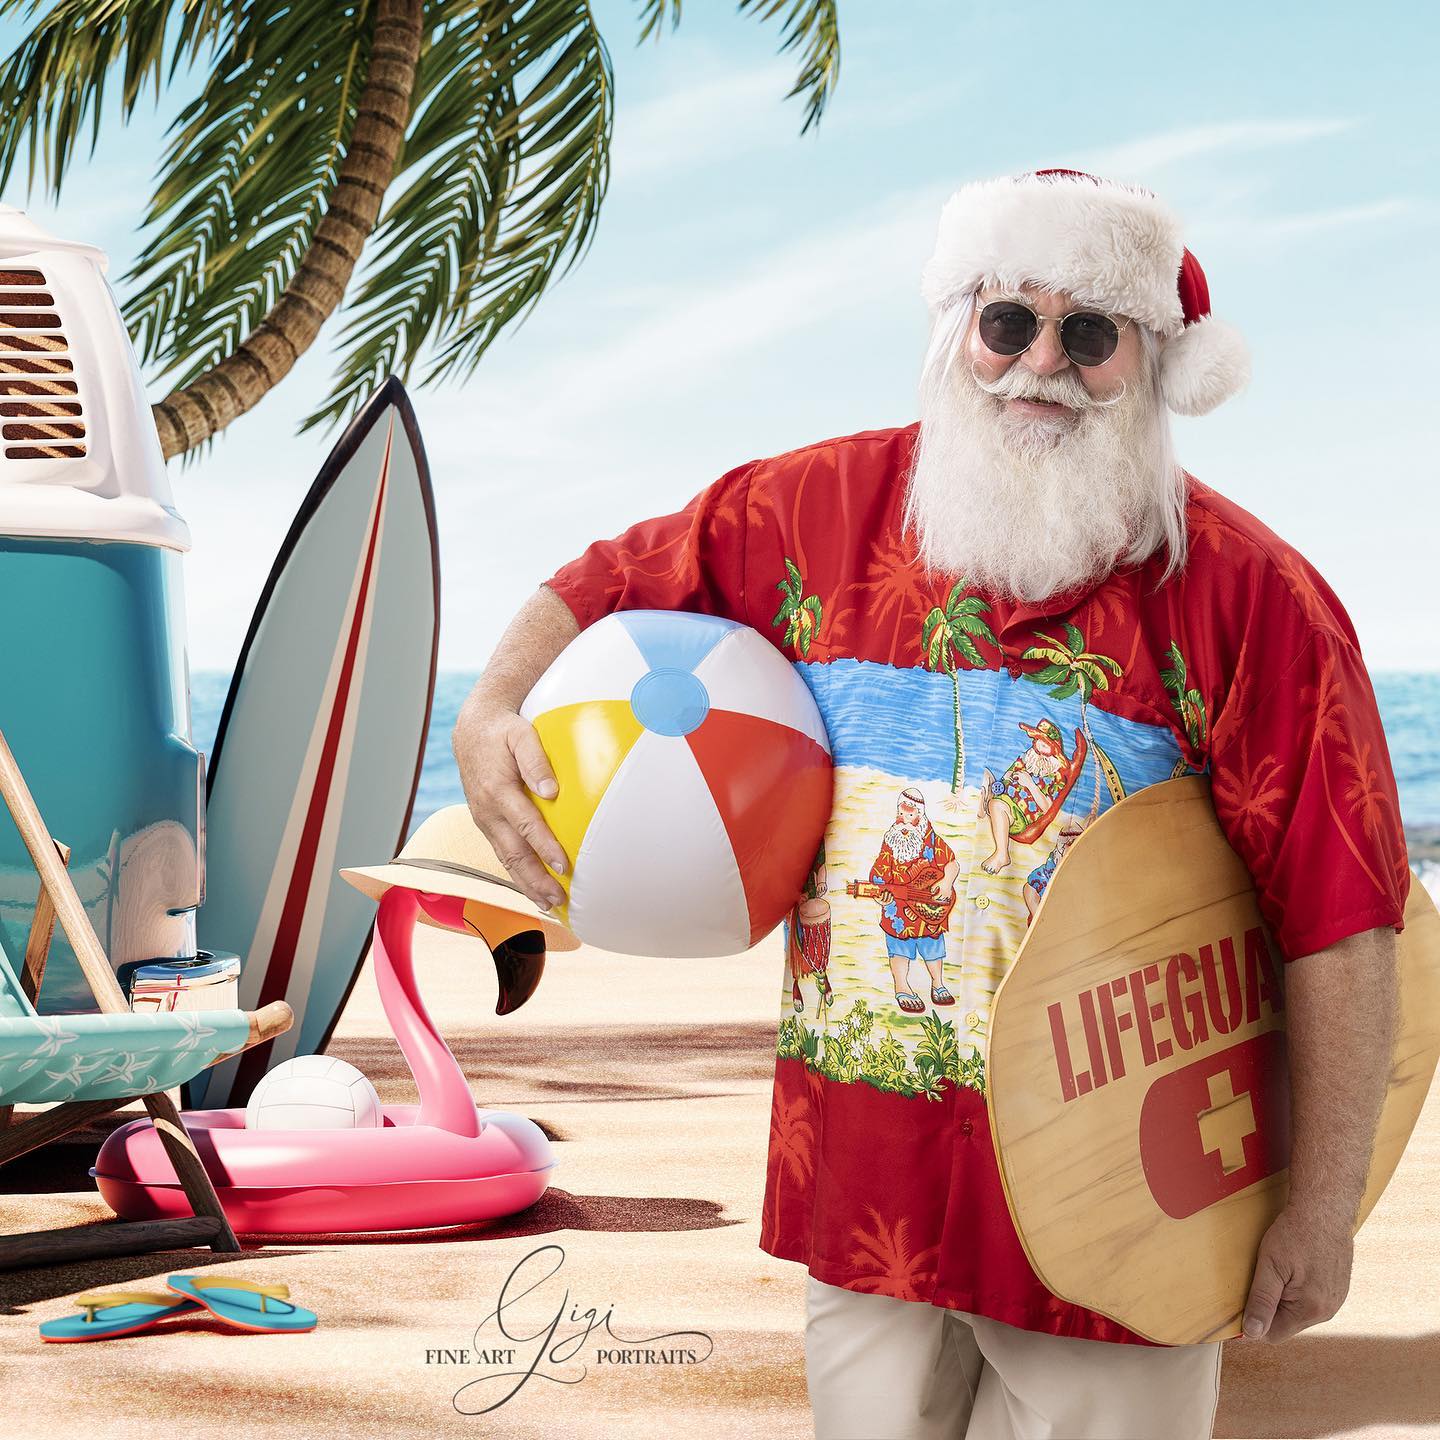 Christmas in July!!!!
Sign ups for Fine Art Santa sessions coming soon!